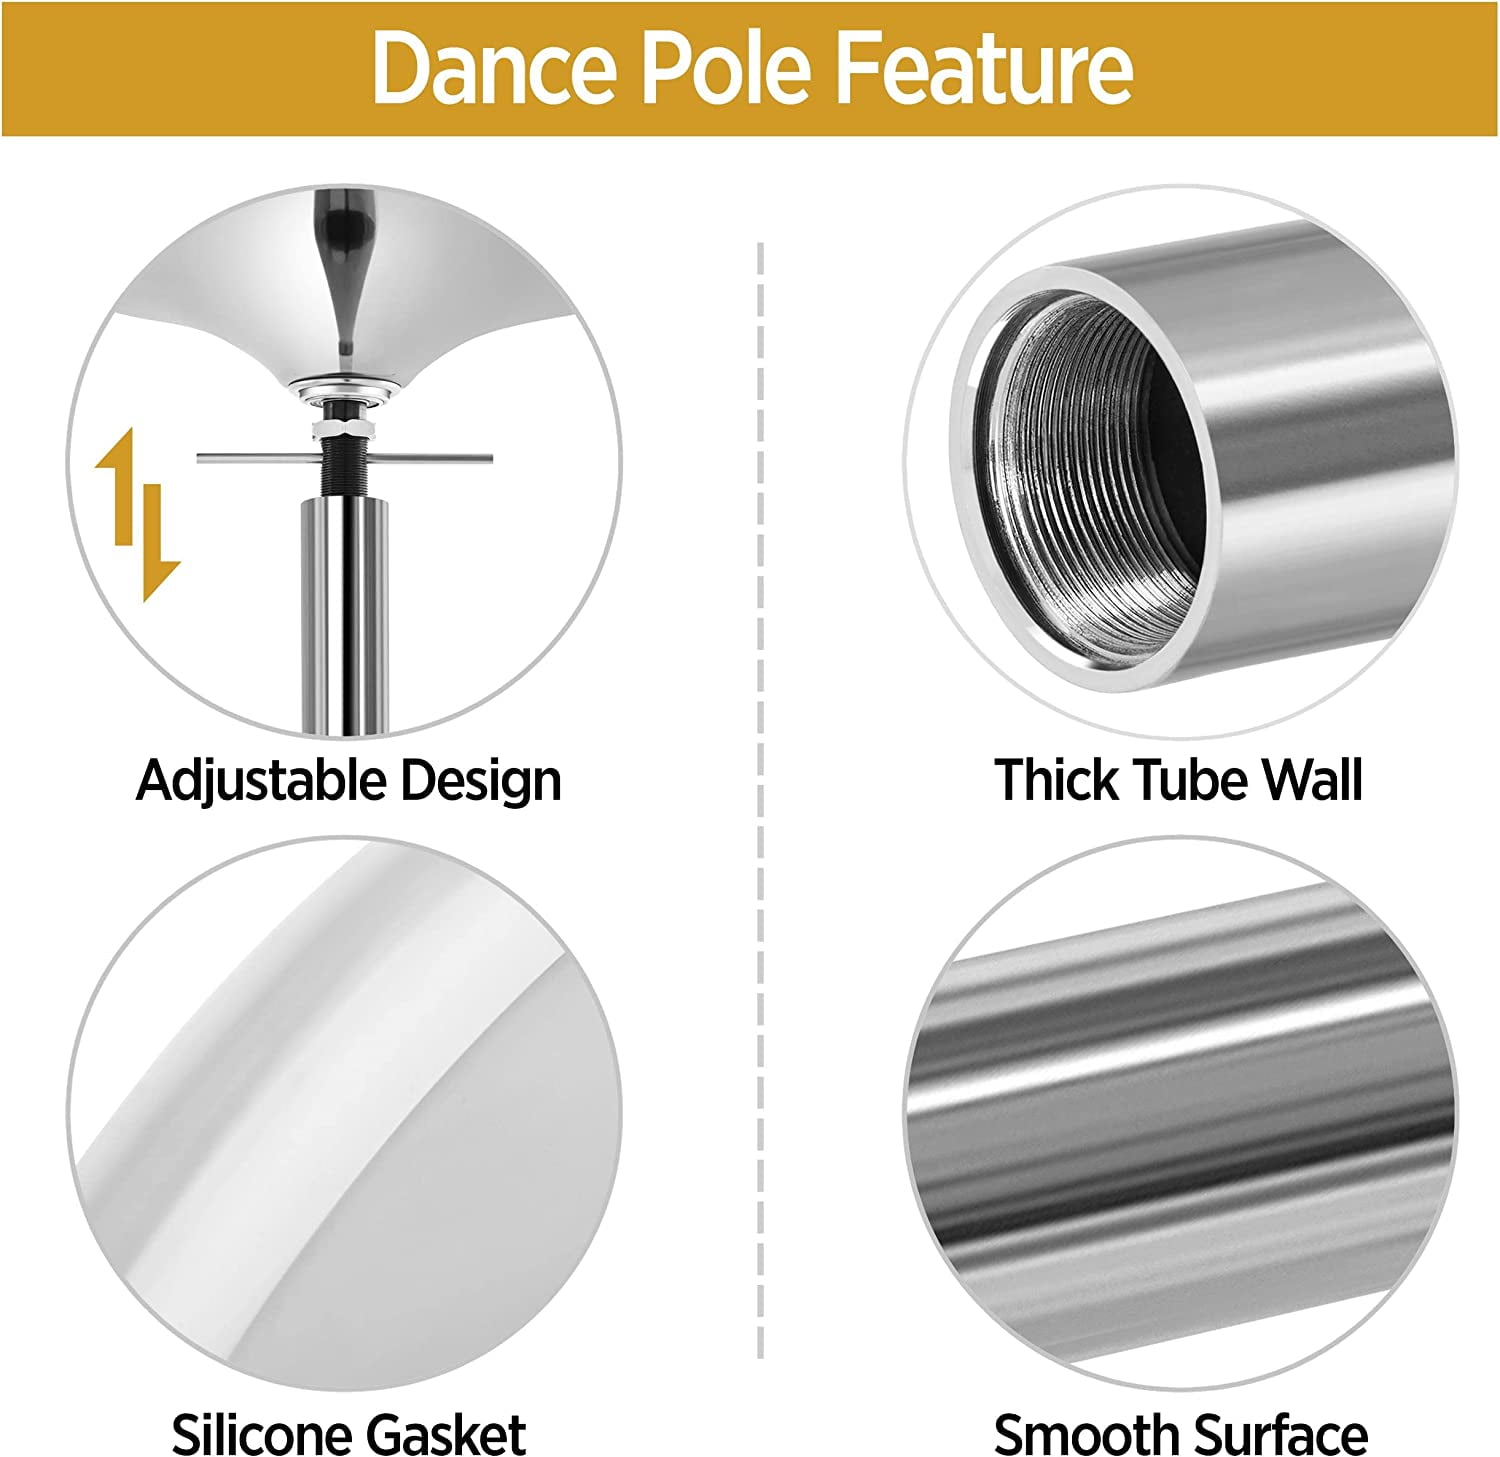 Professional Stripper Pole Spinning Static Dancing Pole Portable Removable  45mm Dance Pole Kit for Exercise Club Party Pub Home w/Tools 